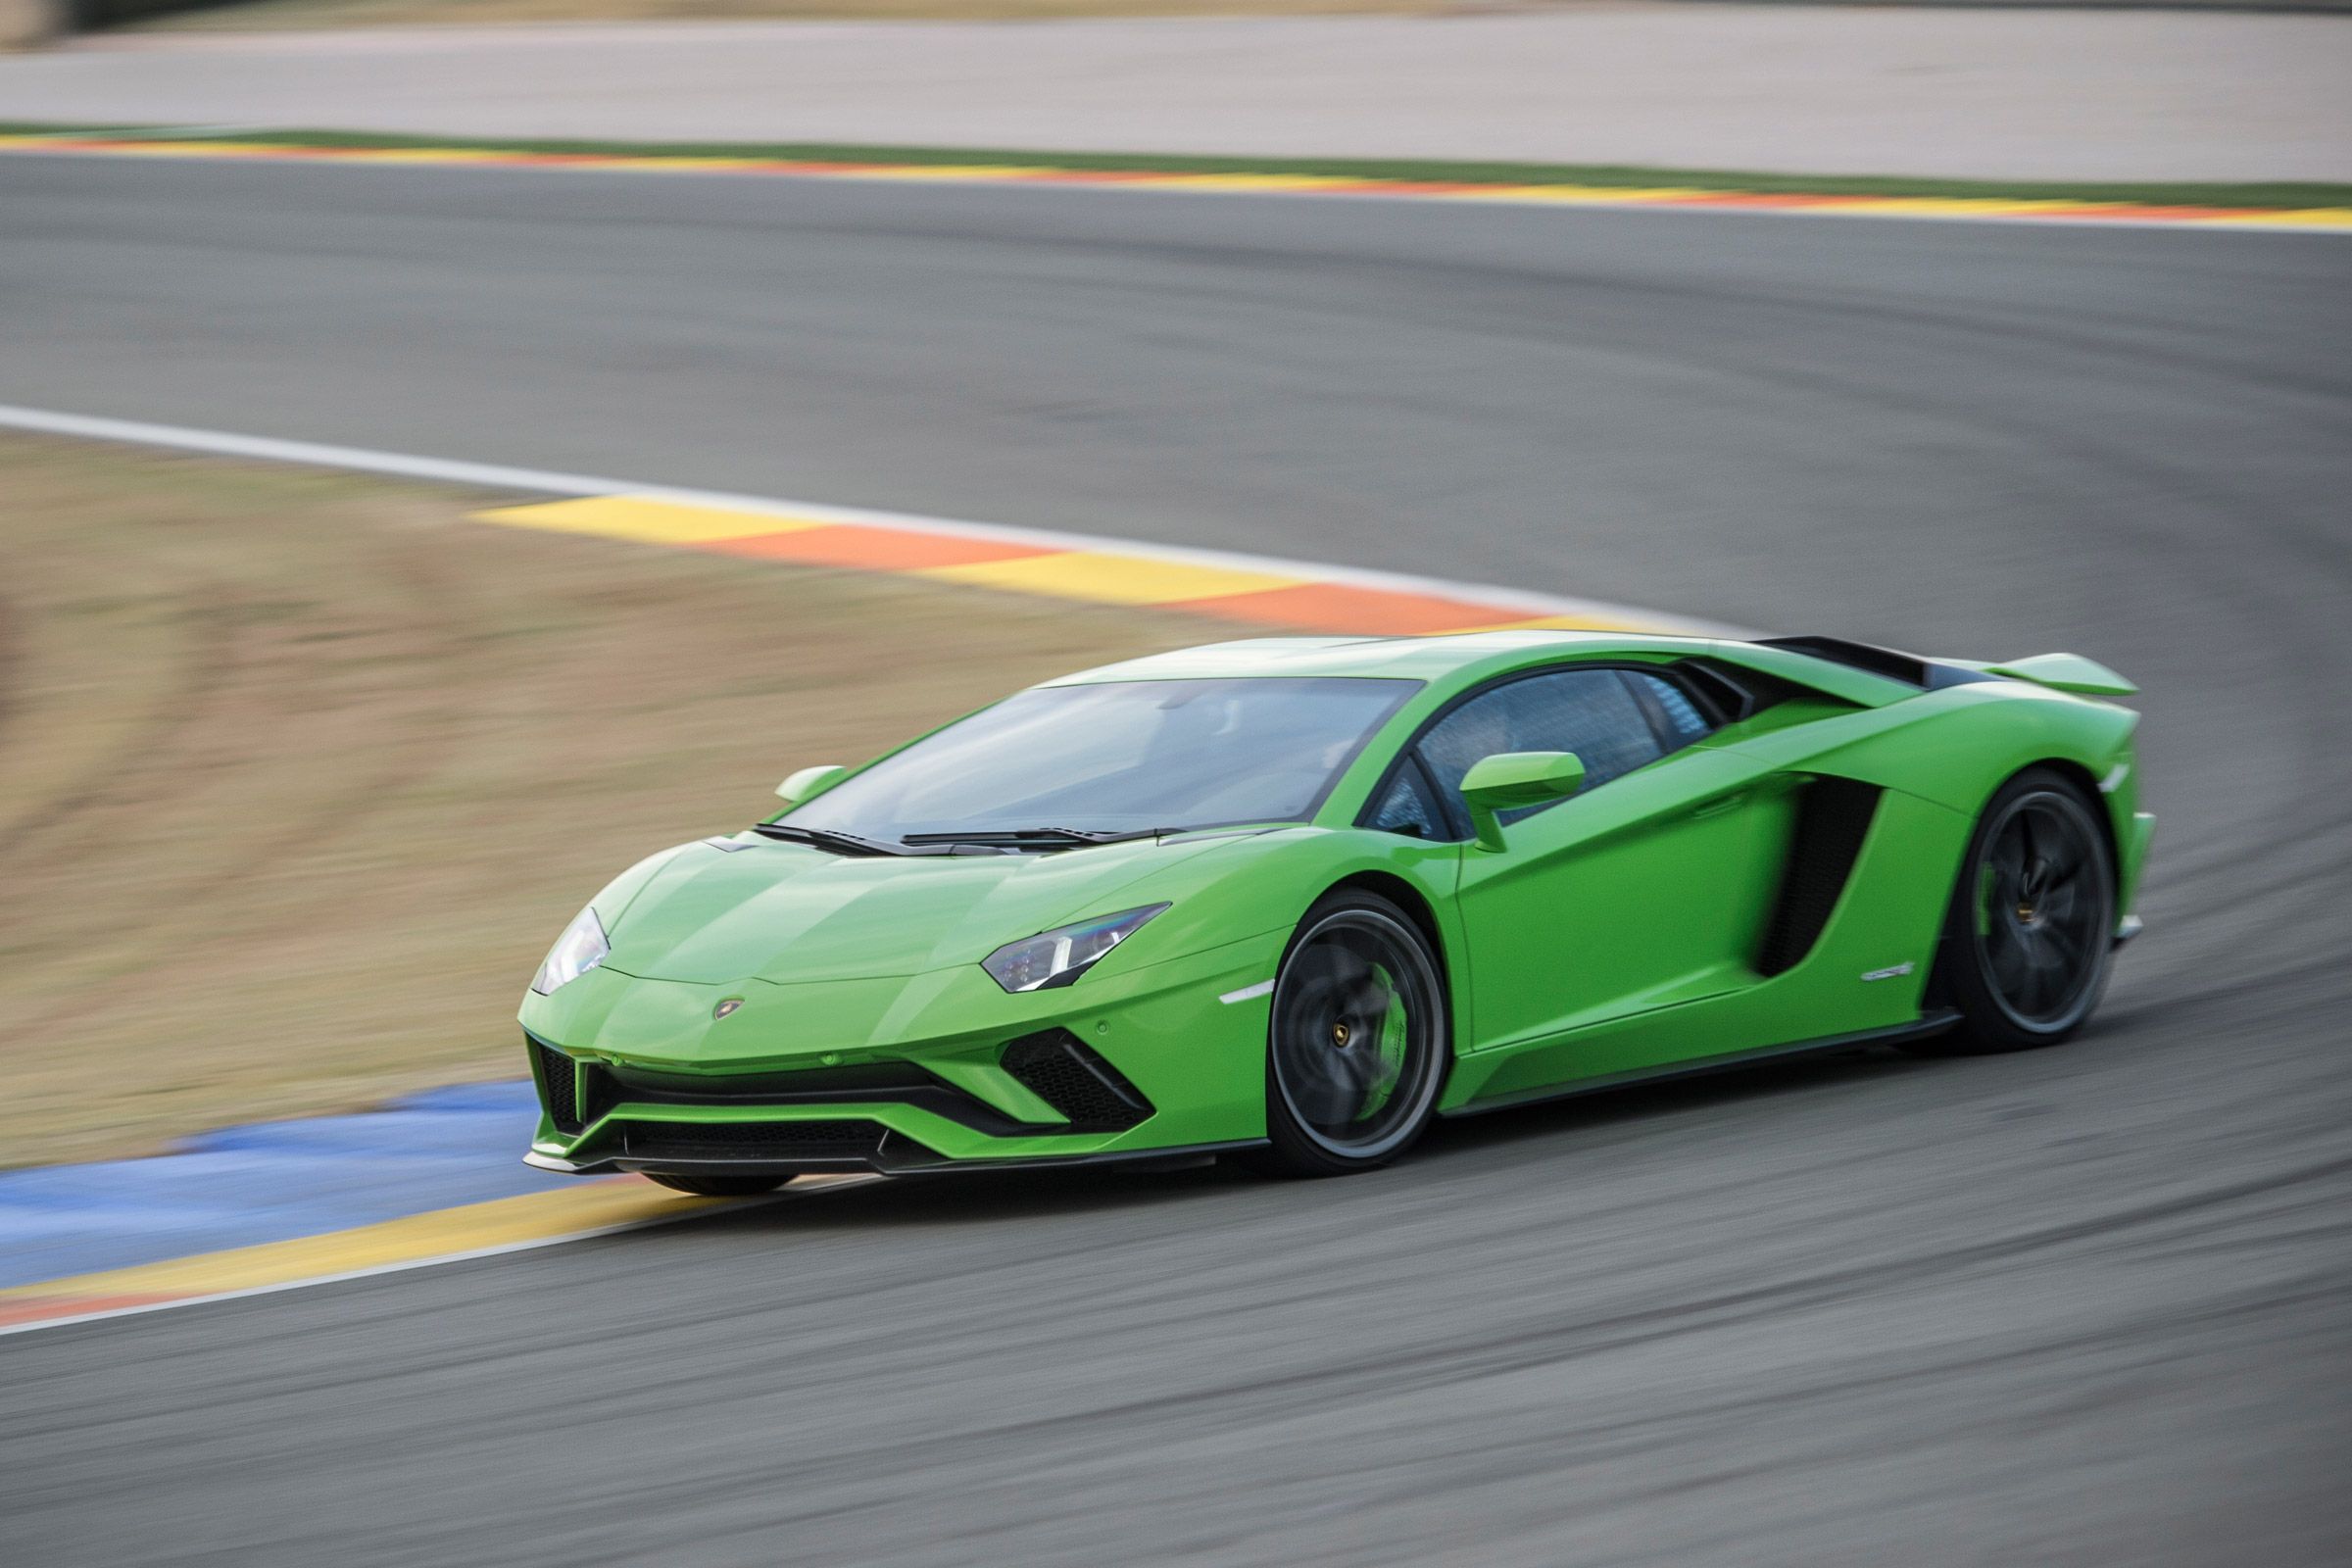 2017 Lamborghini Aventador S Performance Front And Side View (View 11 of 20)